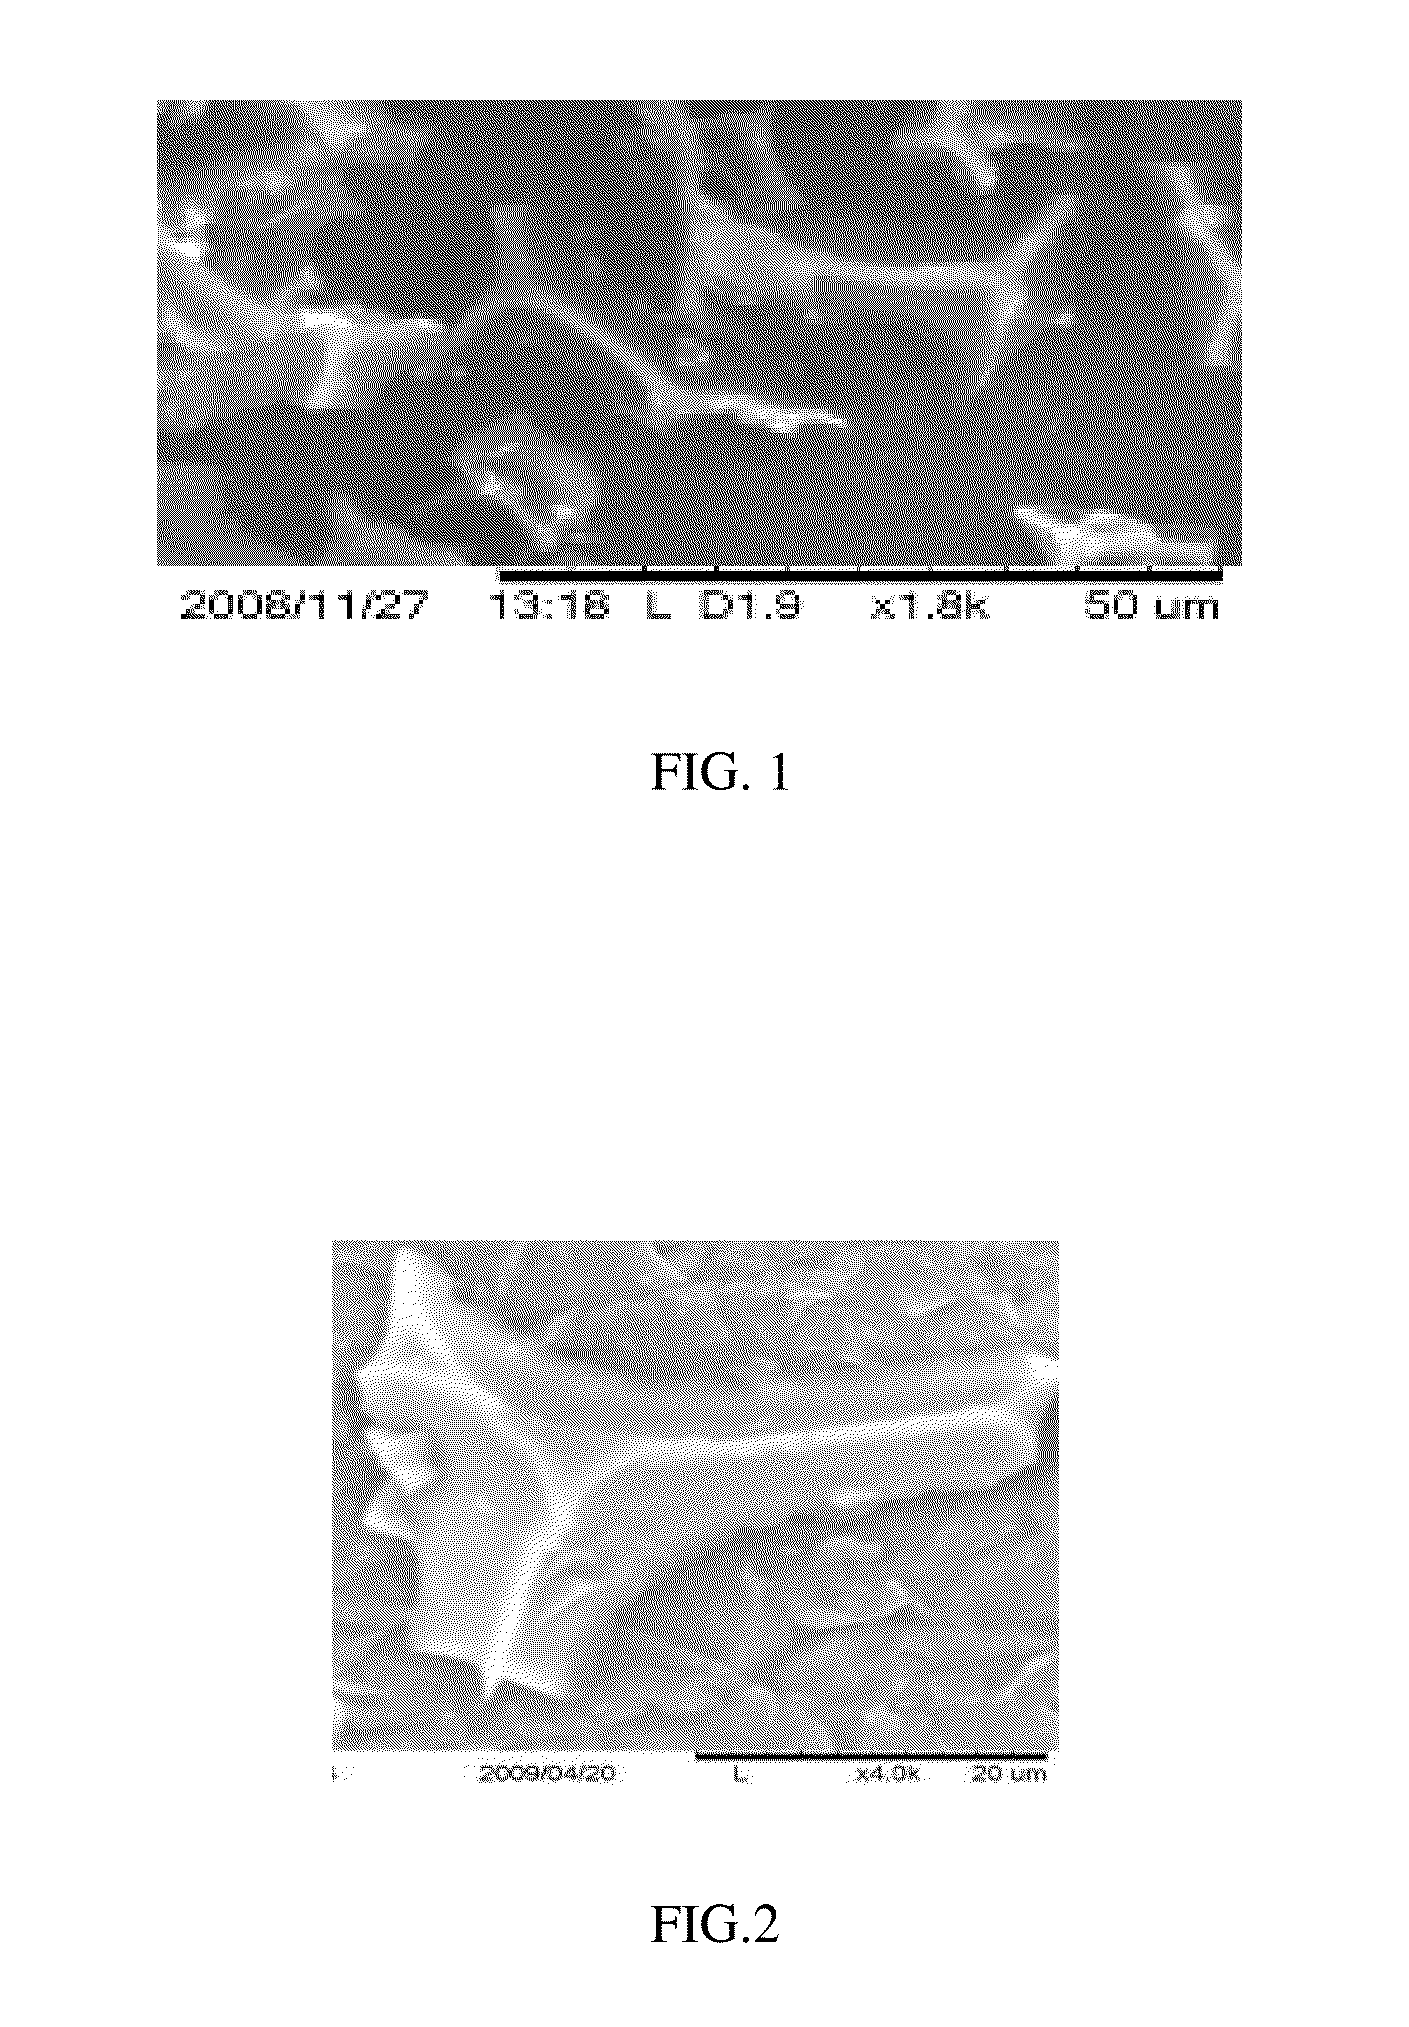 Liquid cleaning and/or cleansing composition comprising a divinyl benzene cross-linked styrene polymer